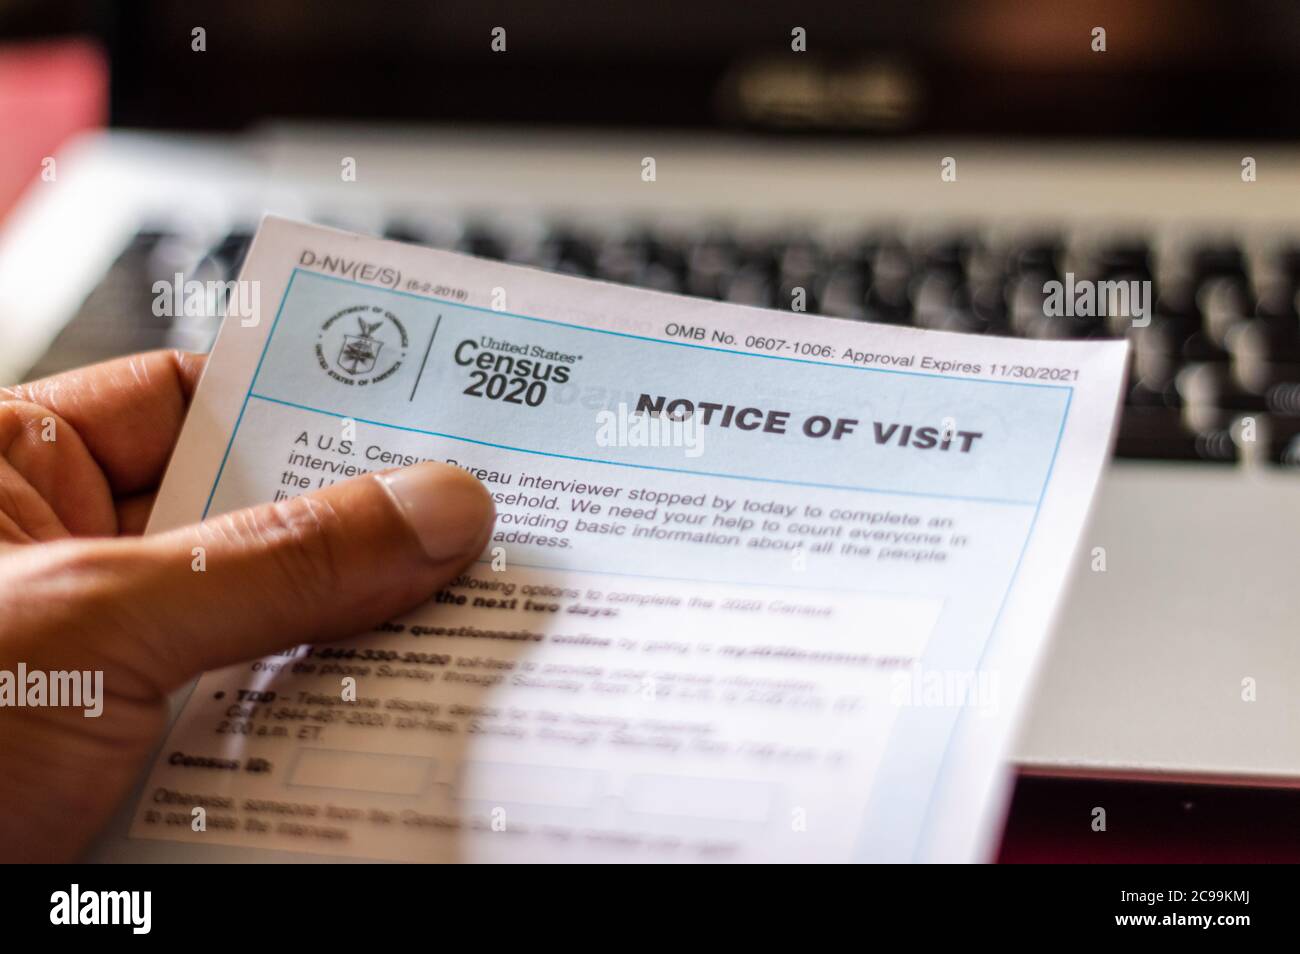 A hand holding a Notice of Visit from the US Census Bureau. Chicago, Illinois-July 29, 2020 Stock Photo